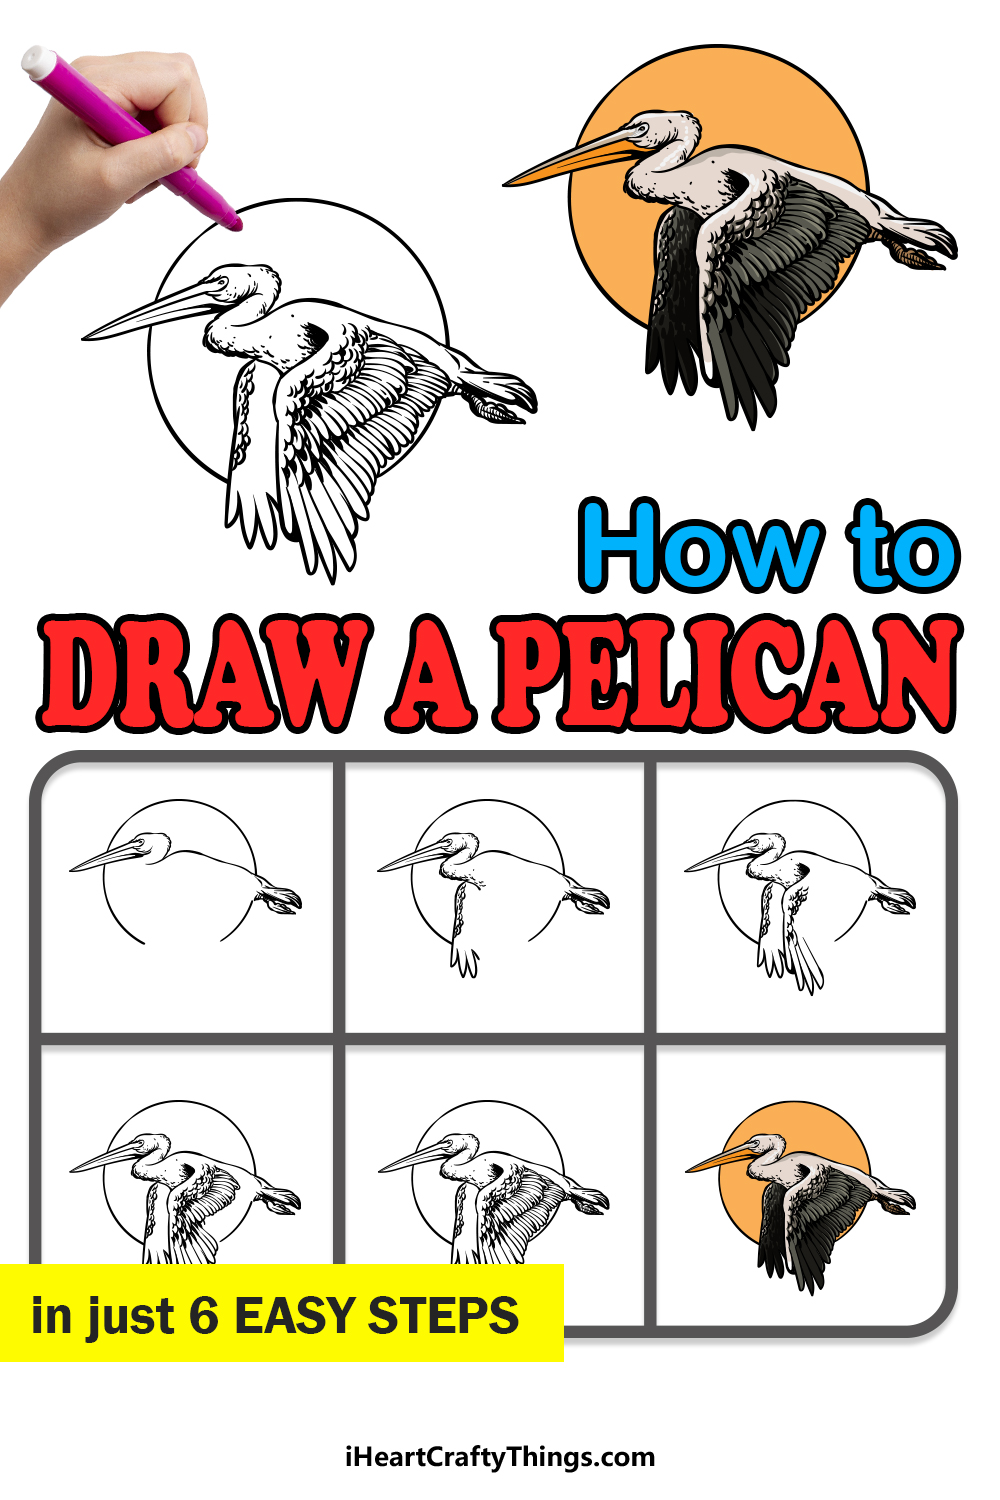 how to draw a pelican in 6 easy steps